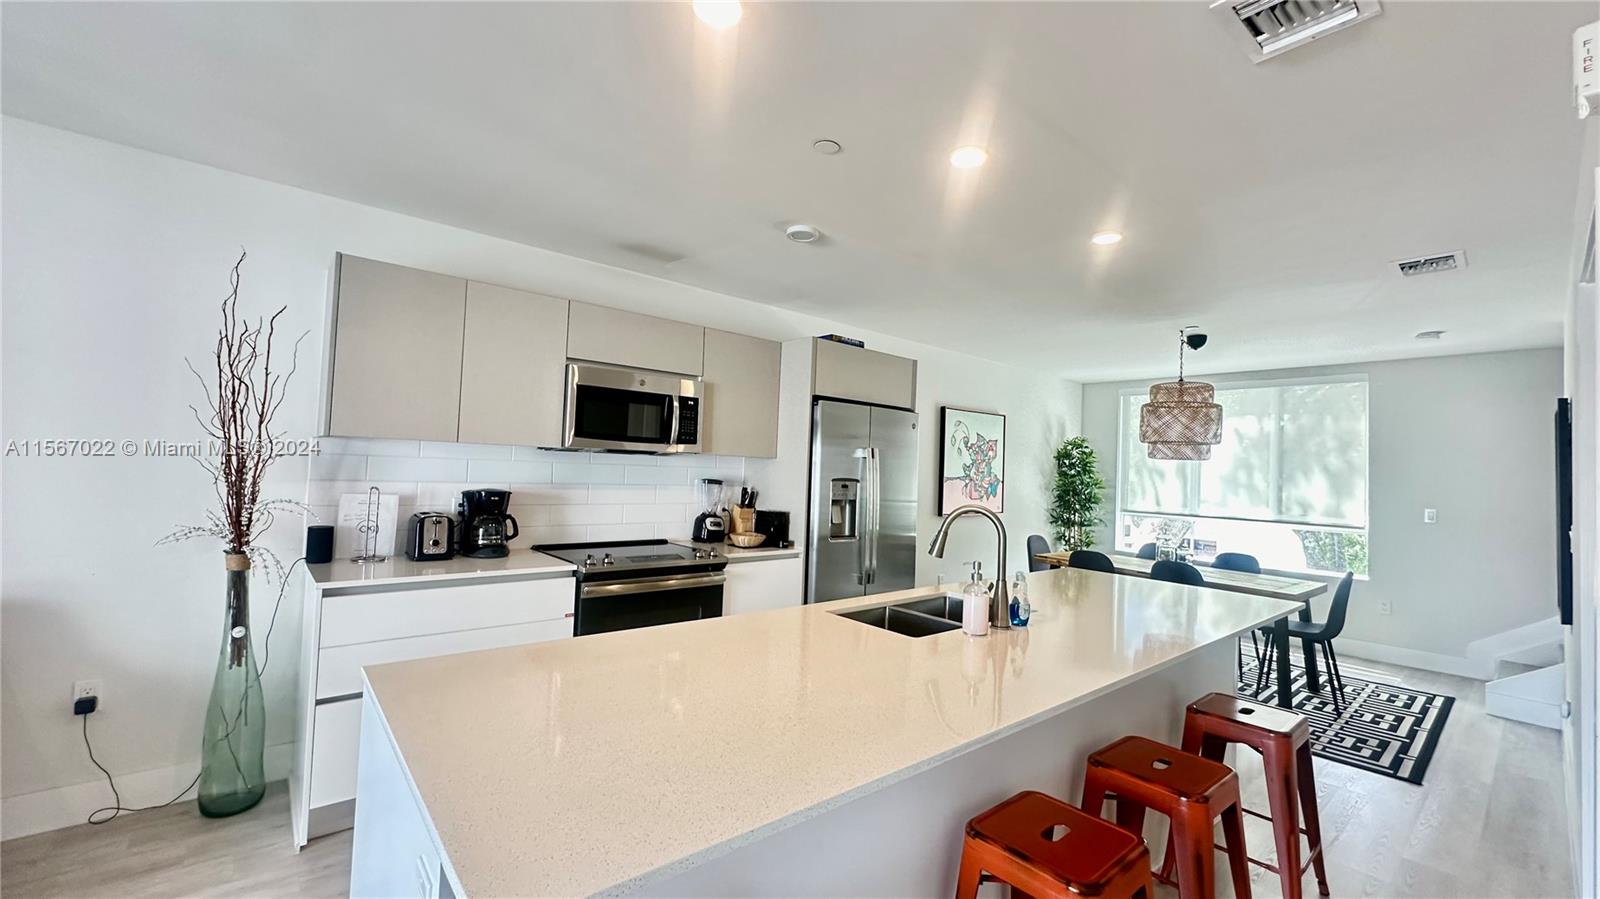 a kitchen with stainless steel appliances a sink a stove a refrigerator a dining table and chairs with wooden floor